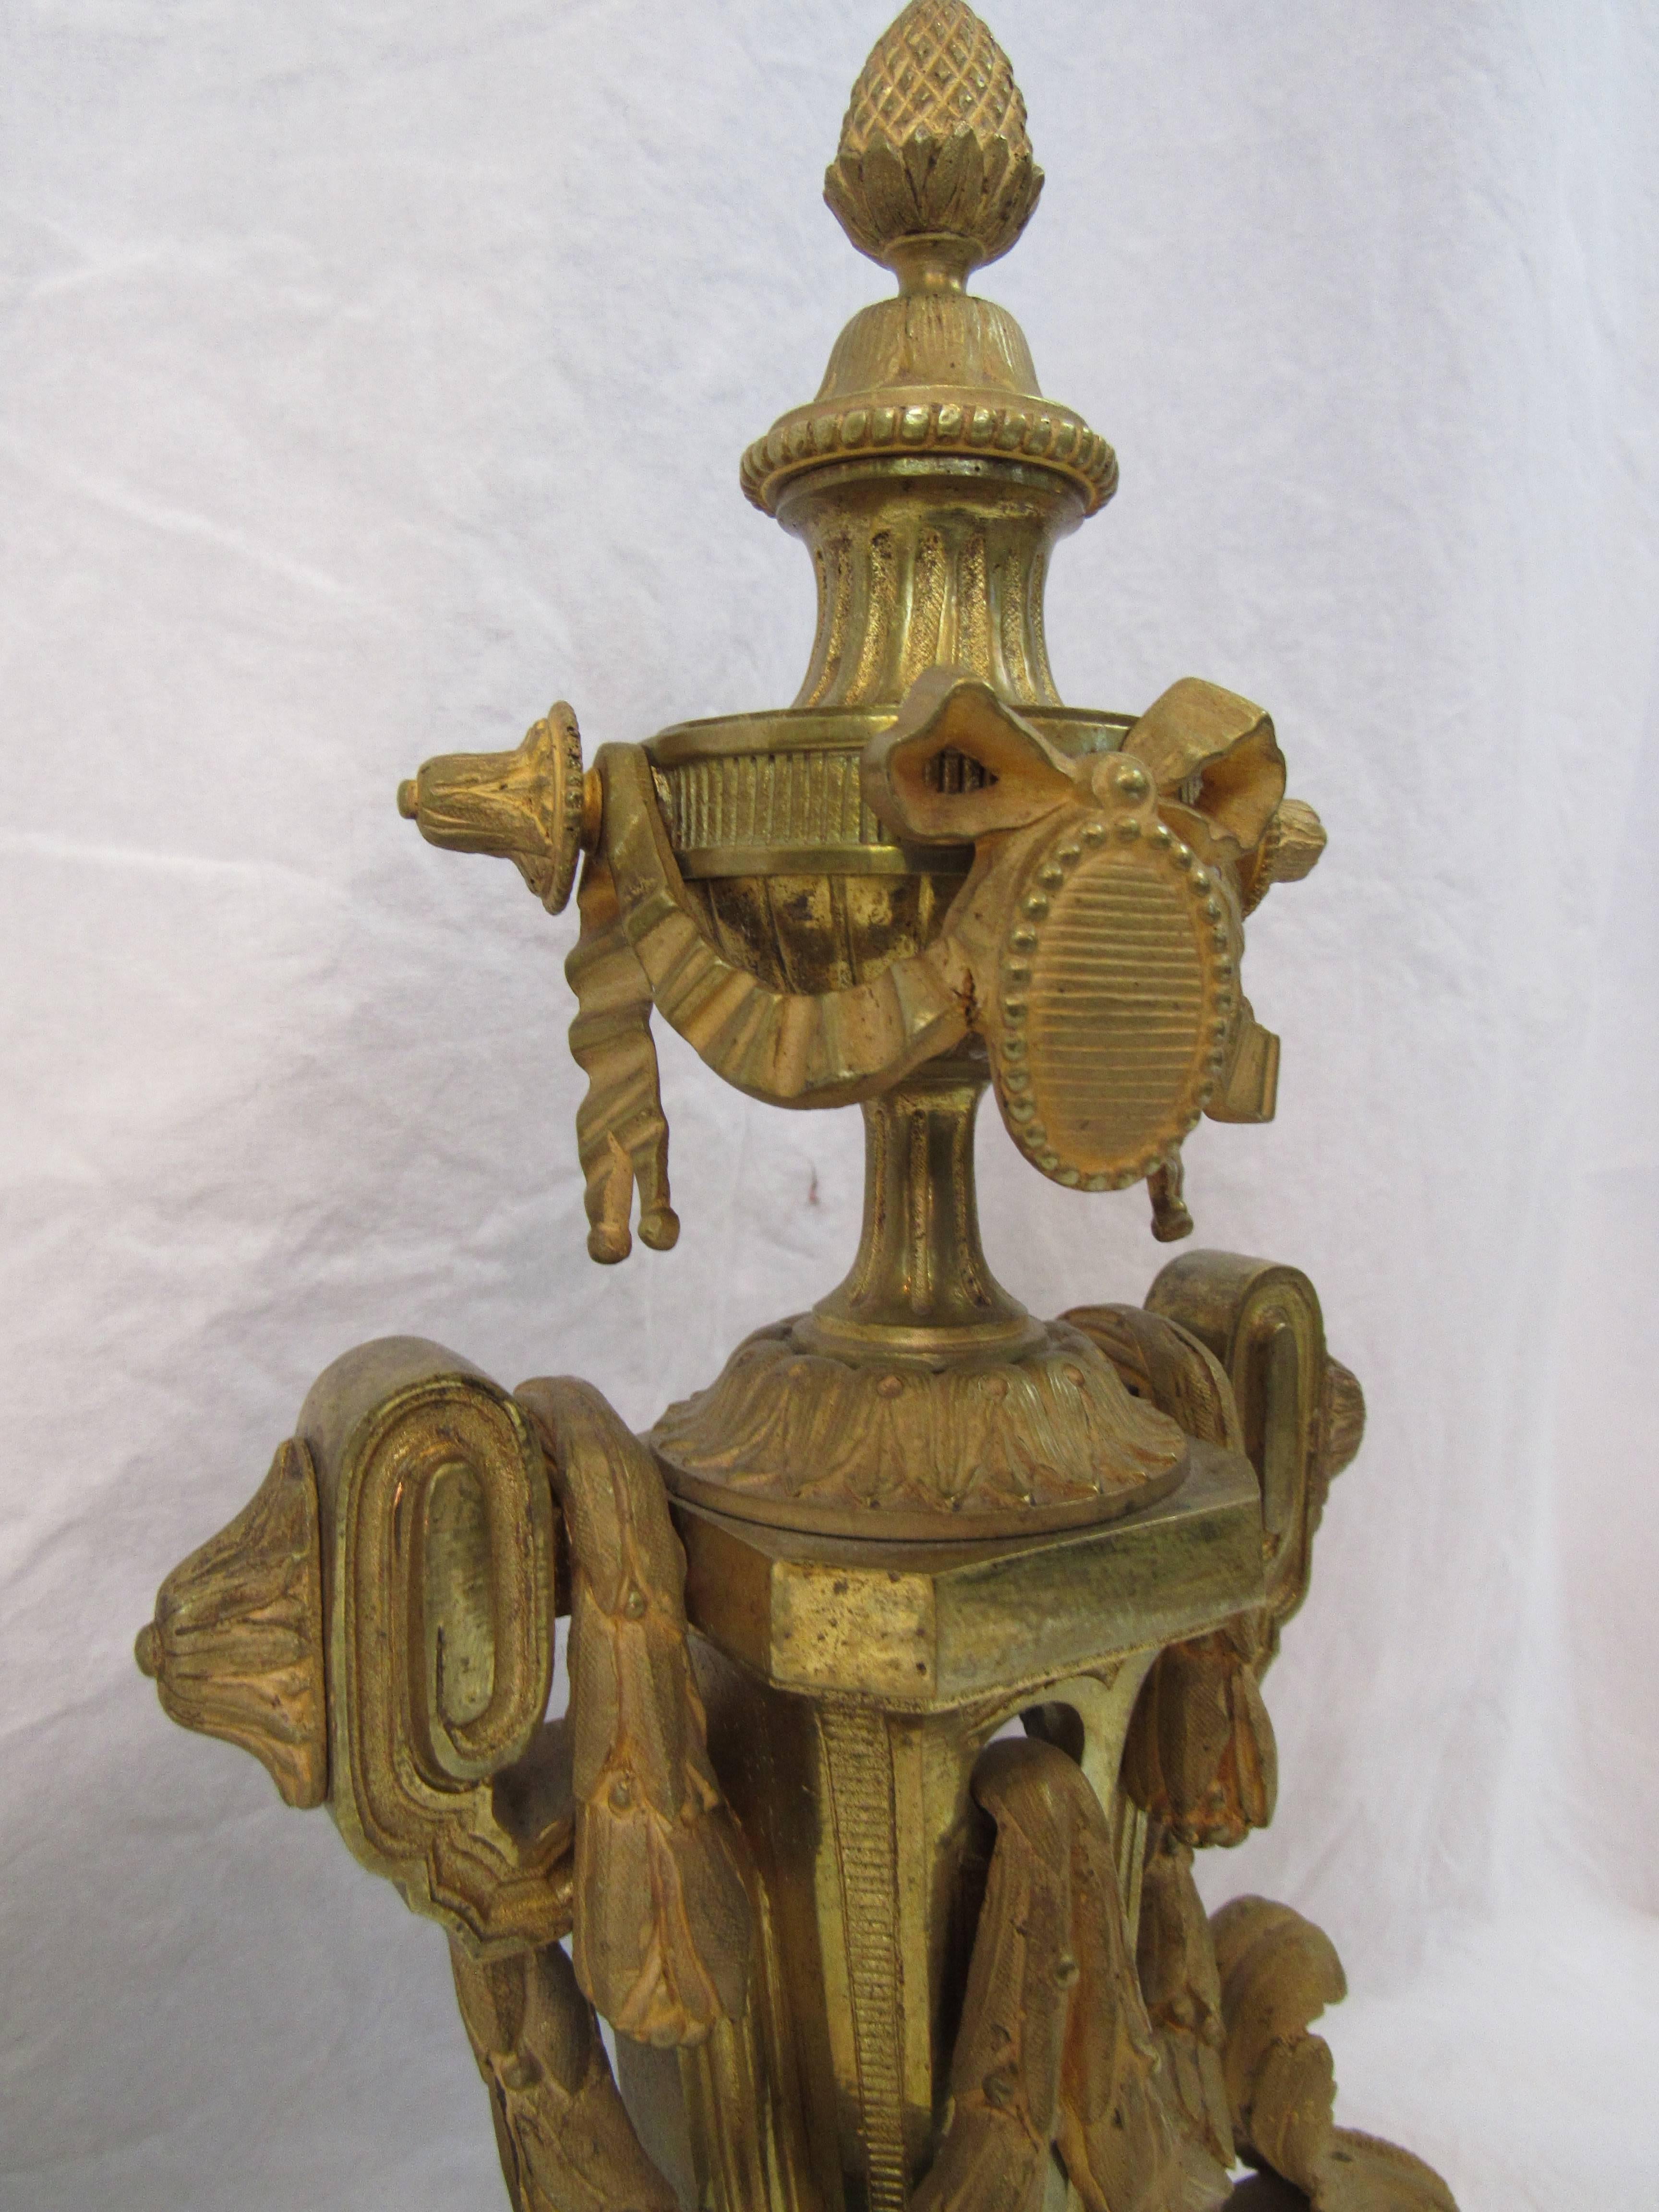 Adjustable fireplace fender. Urns and swags.

French ormolu, 19th century. Lovely patinated color.

Adjustable from 33